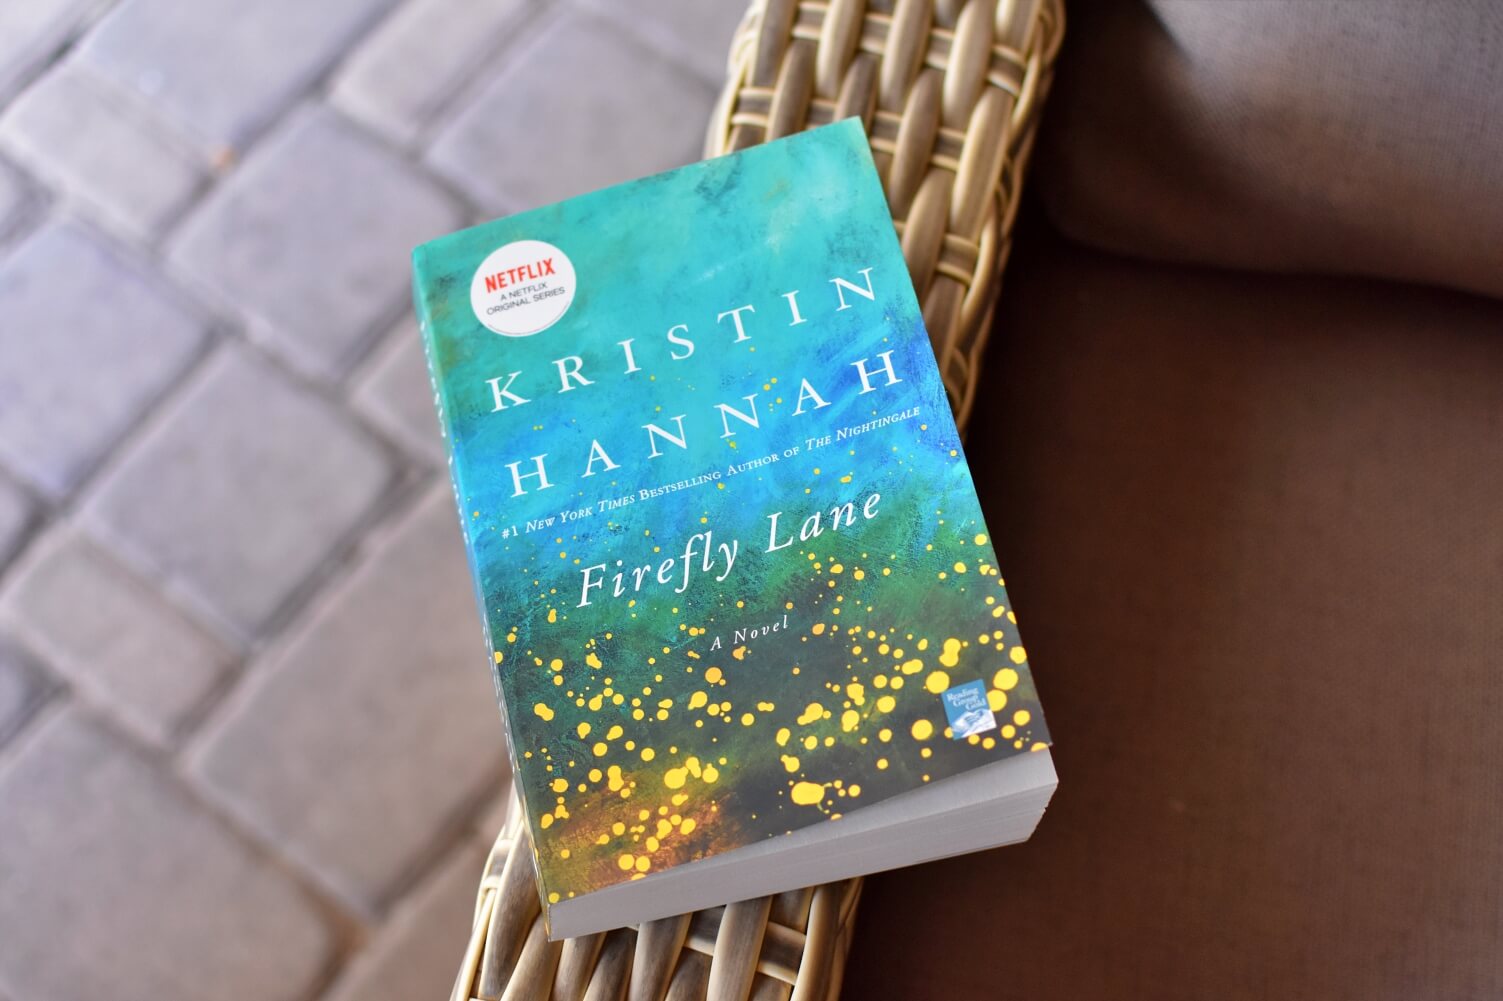 Review: Firefly Lane by Kristin Hannah